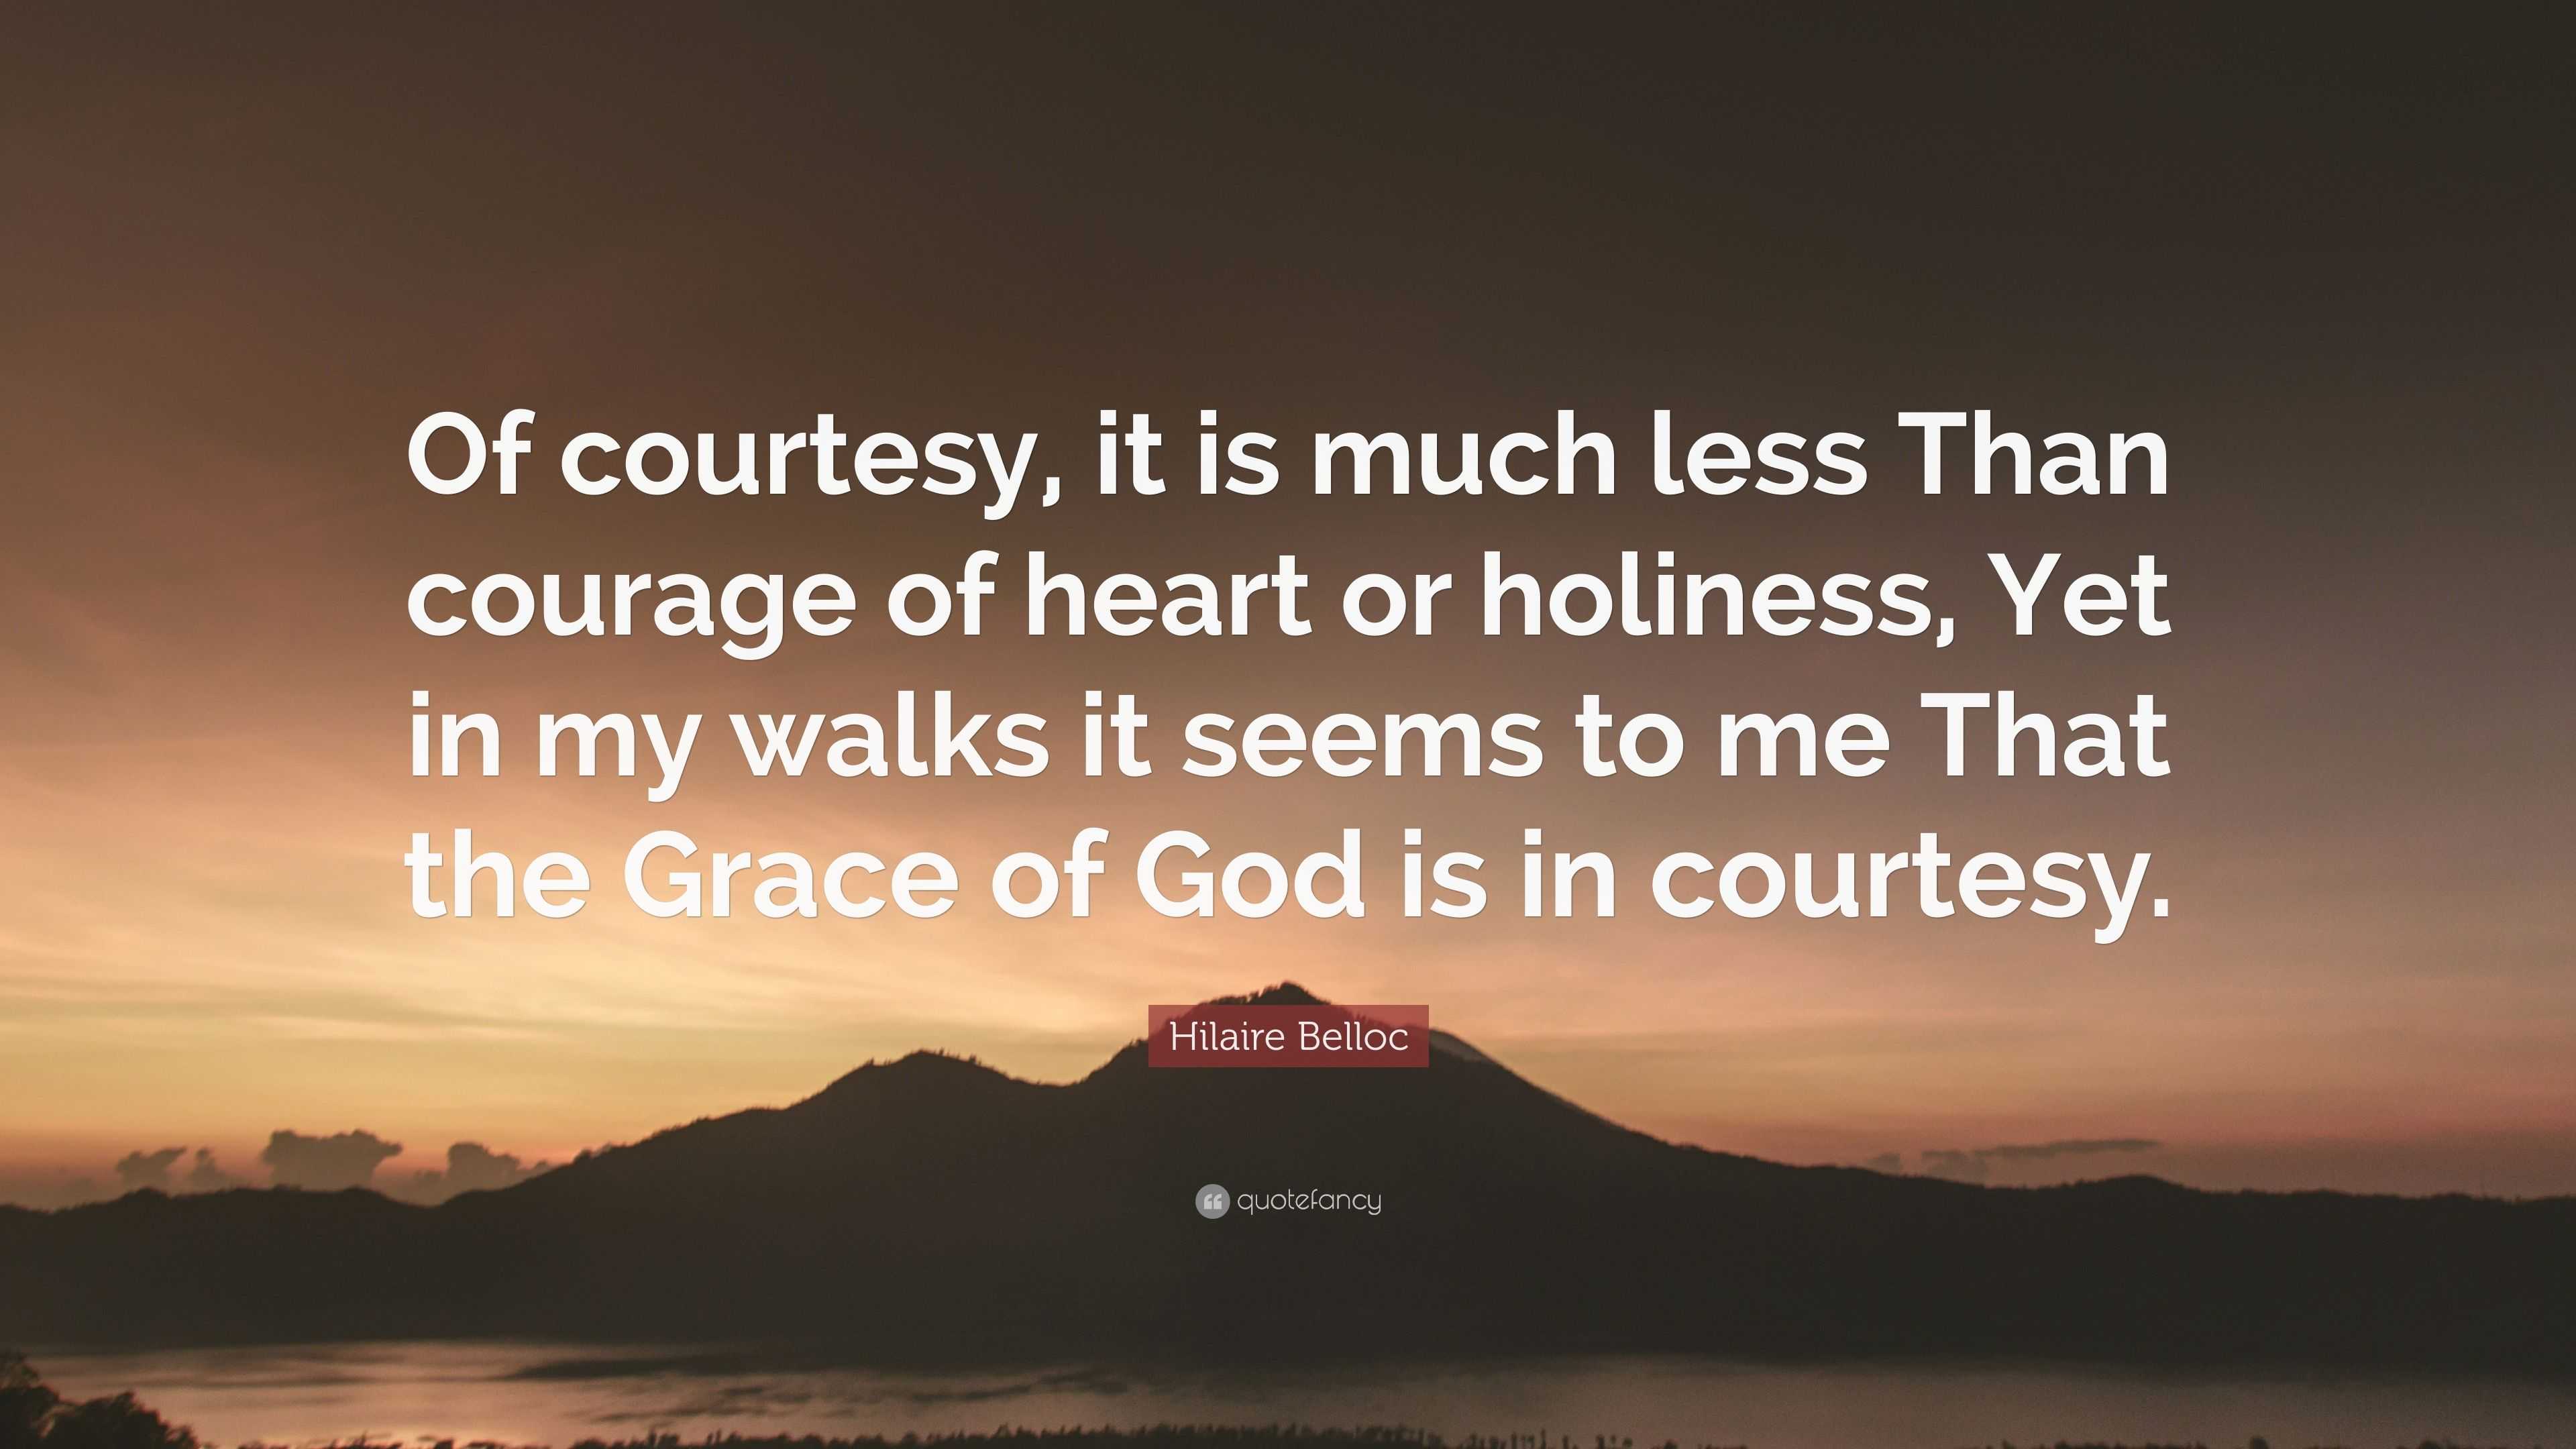 Hilaire Belloc Quote: “Of courtesy, it is much less Than courage of ...